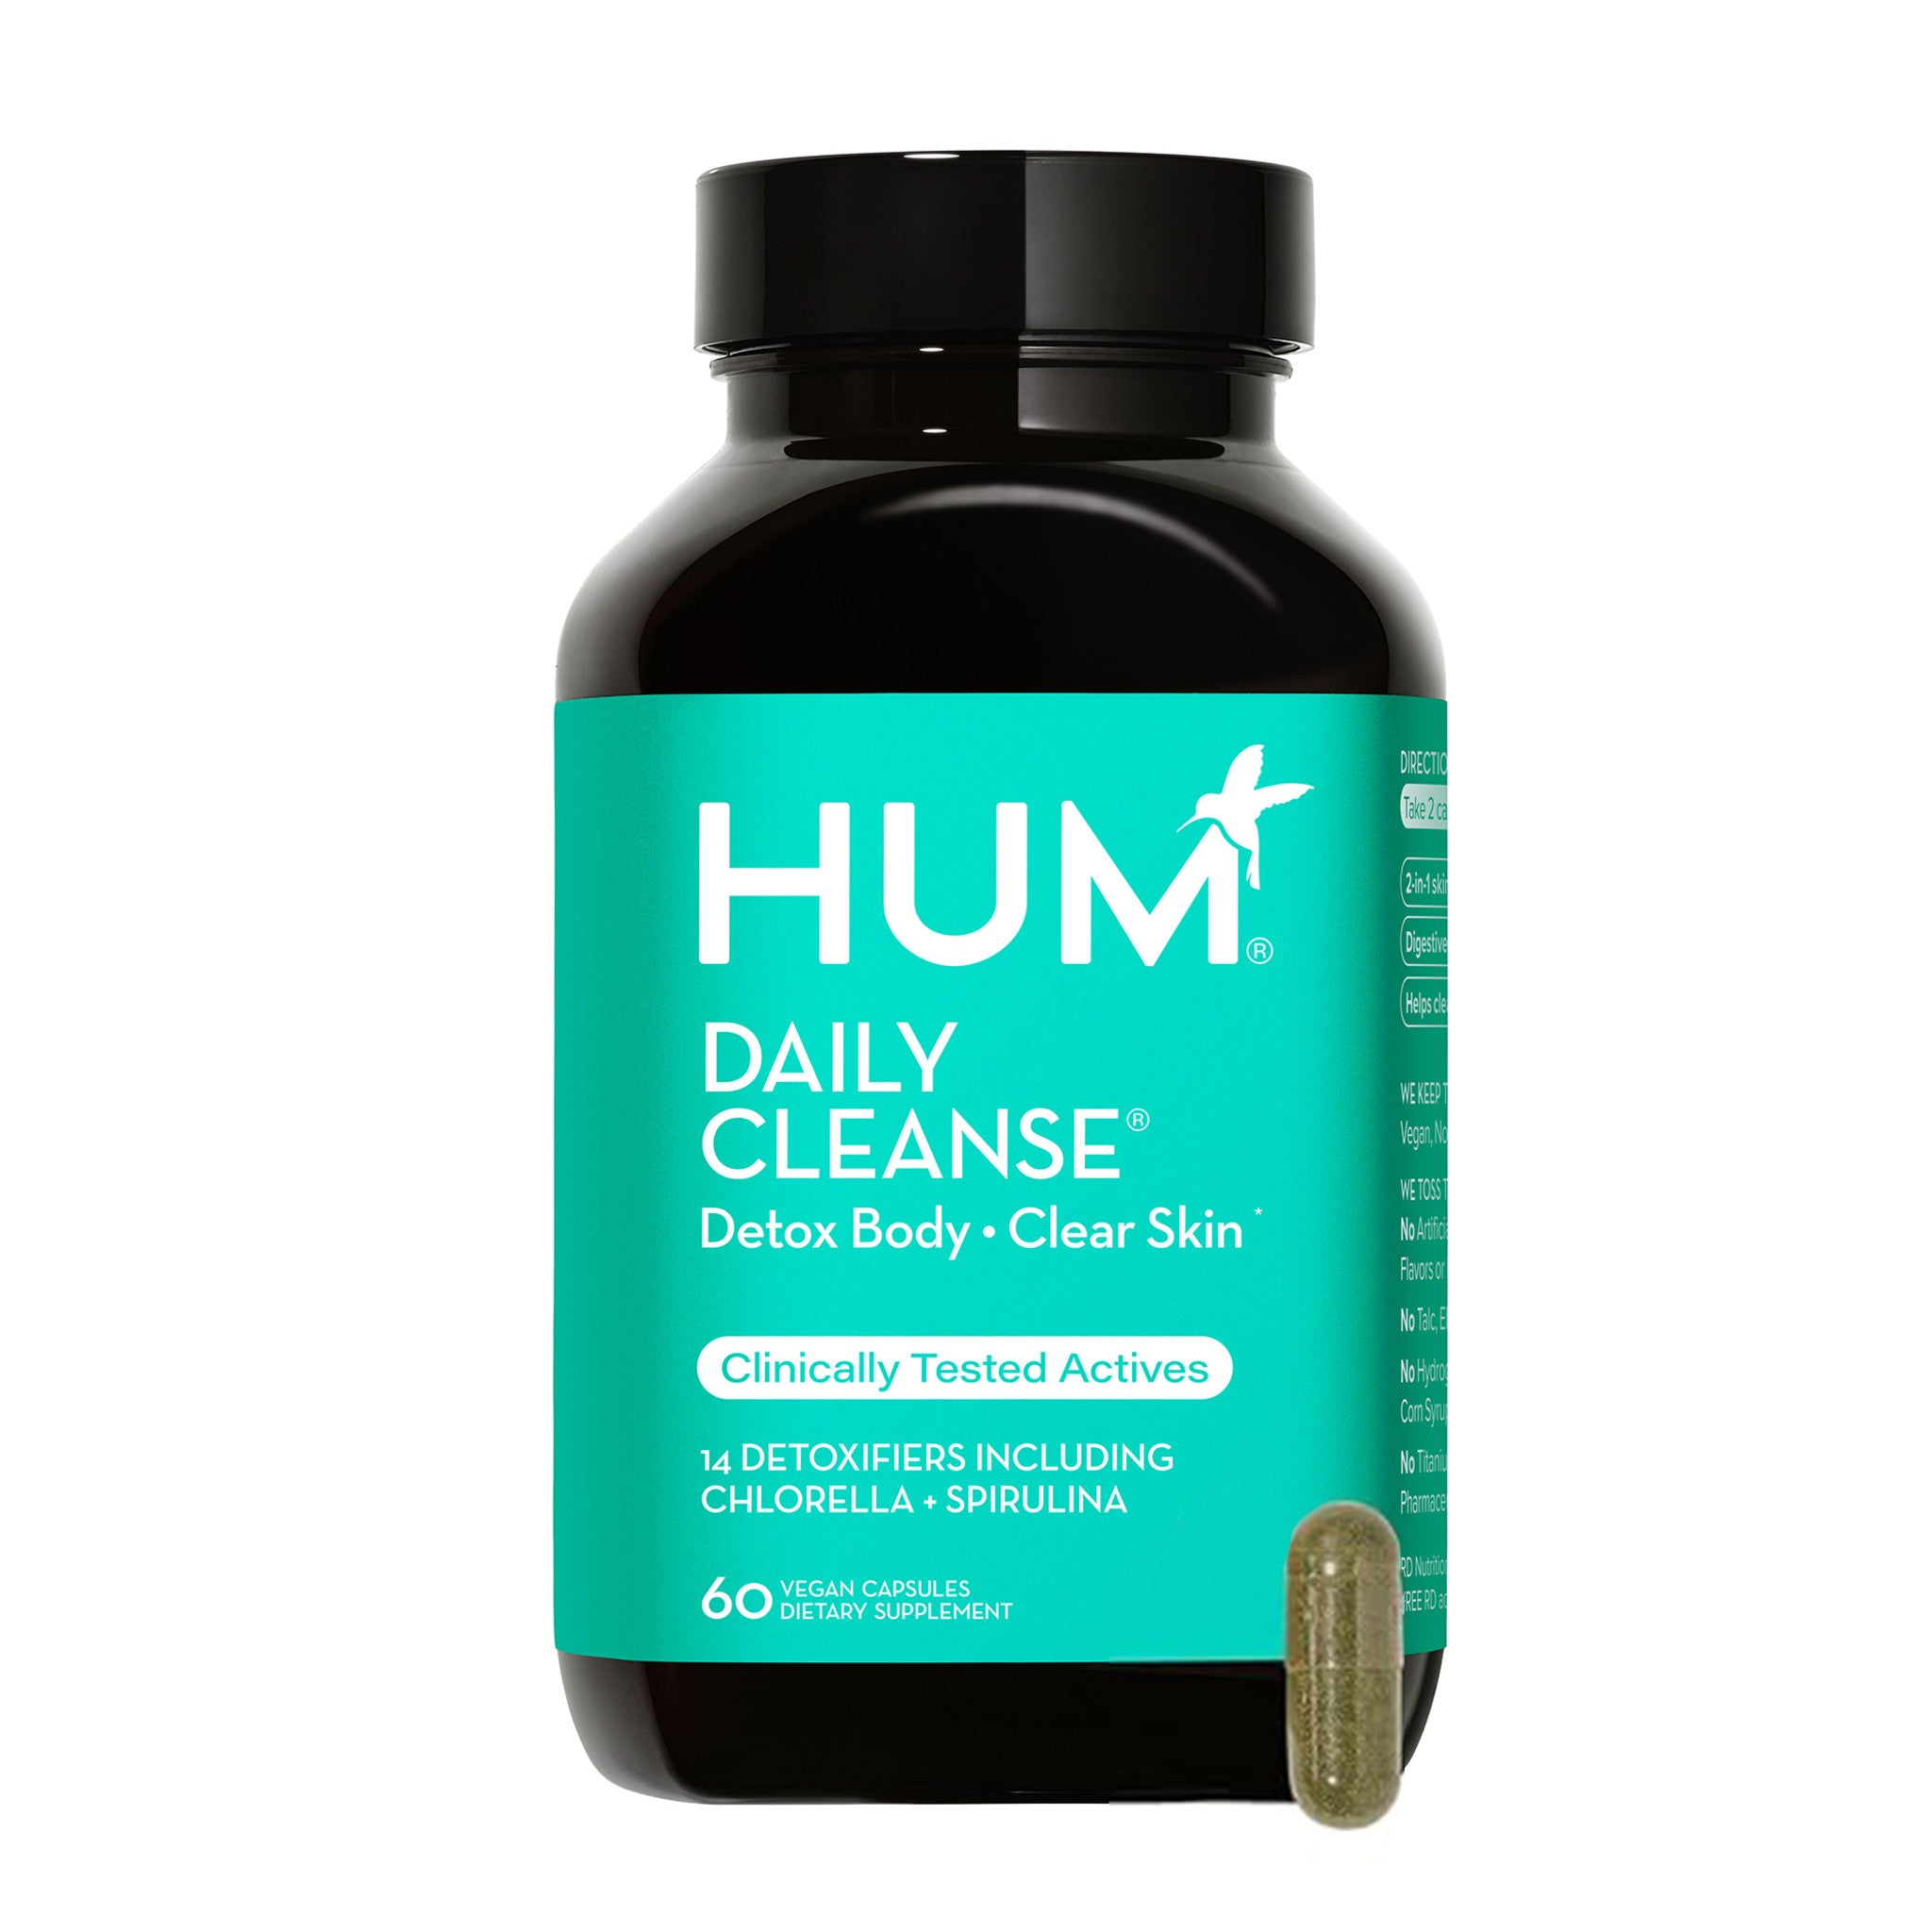 Hum Daily Cleanse Clear Skin and Acne Supplement main image.